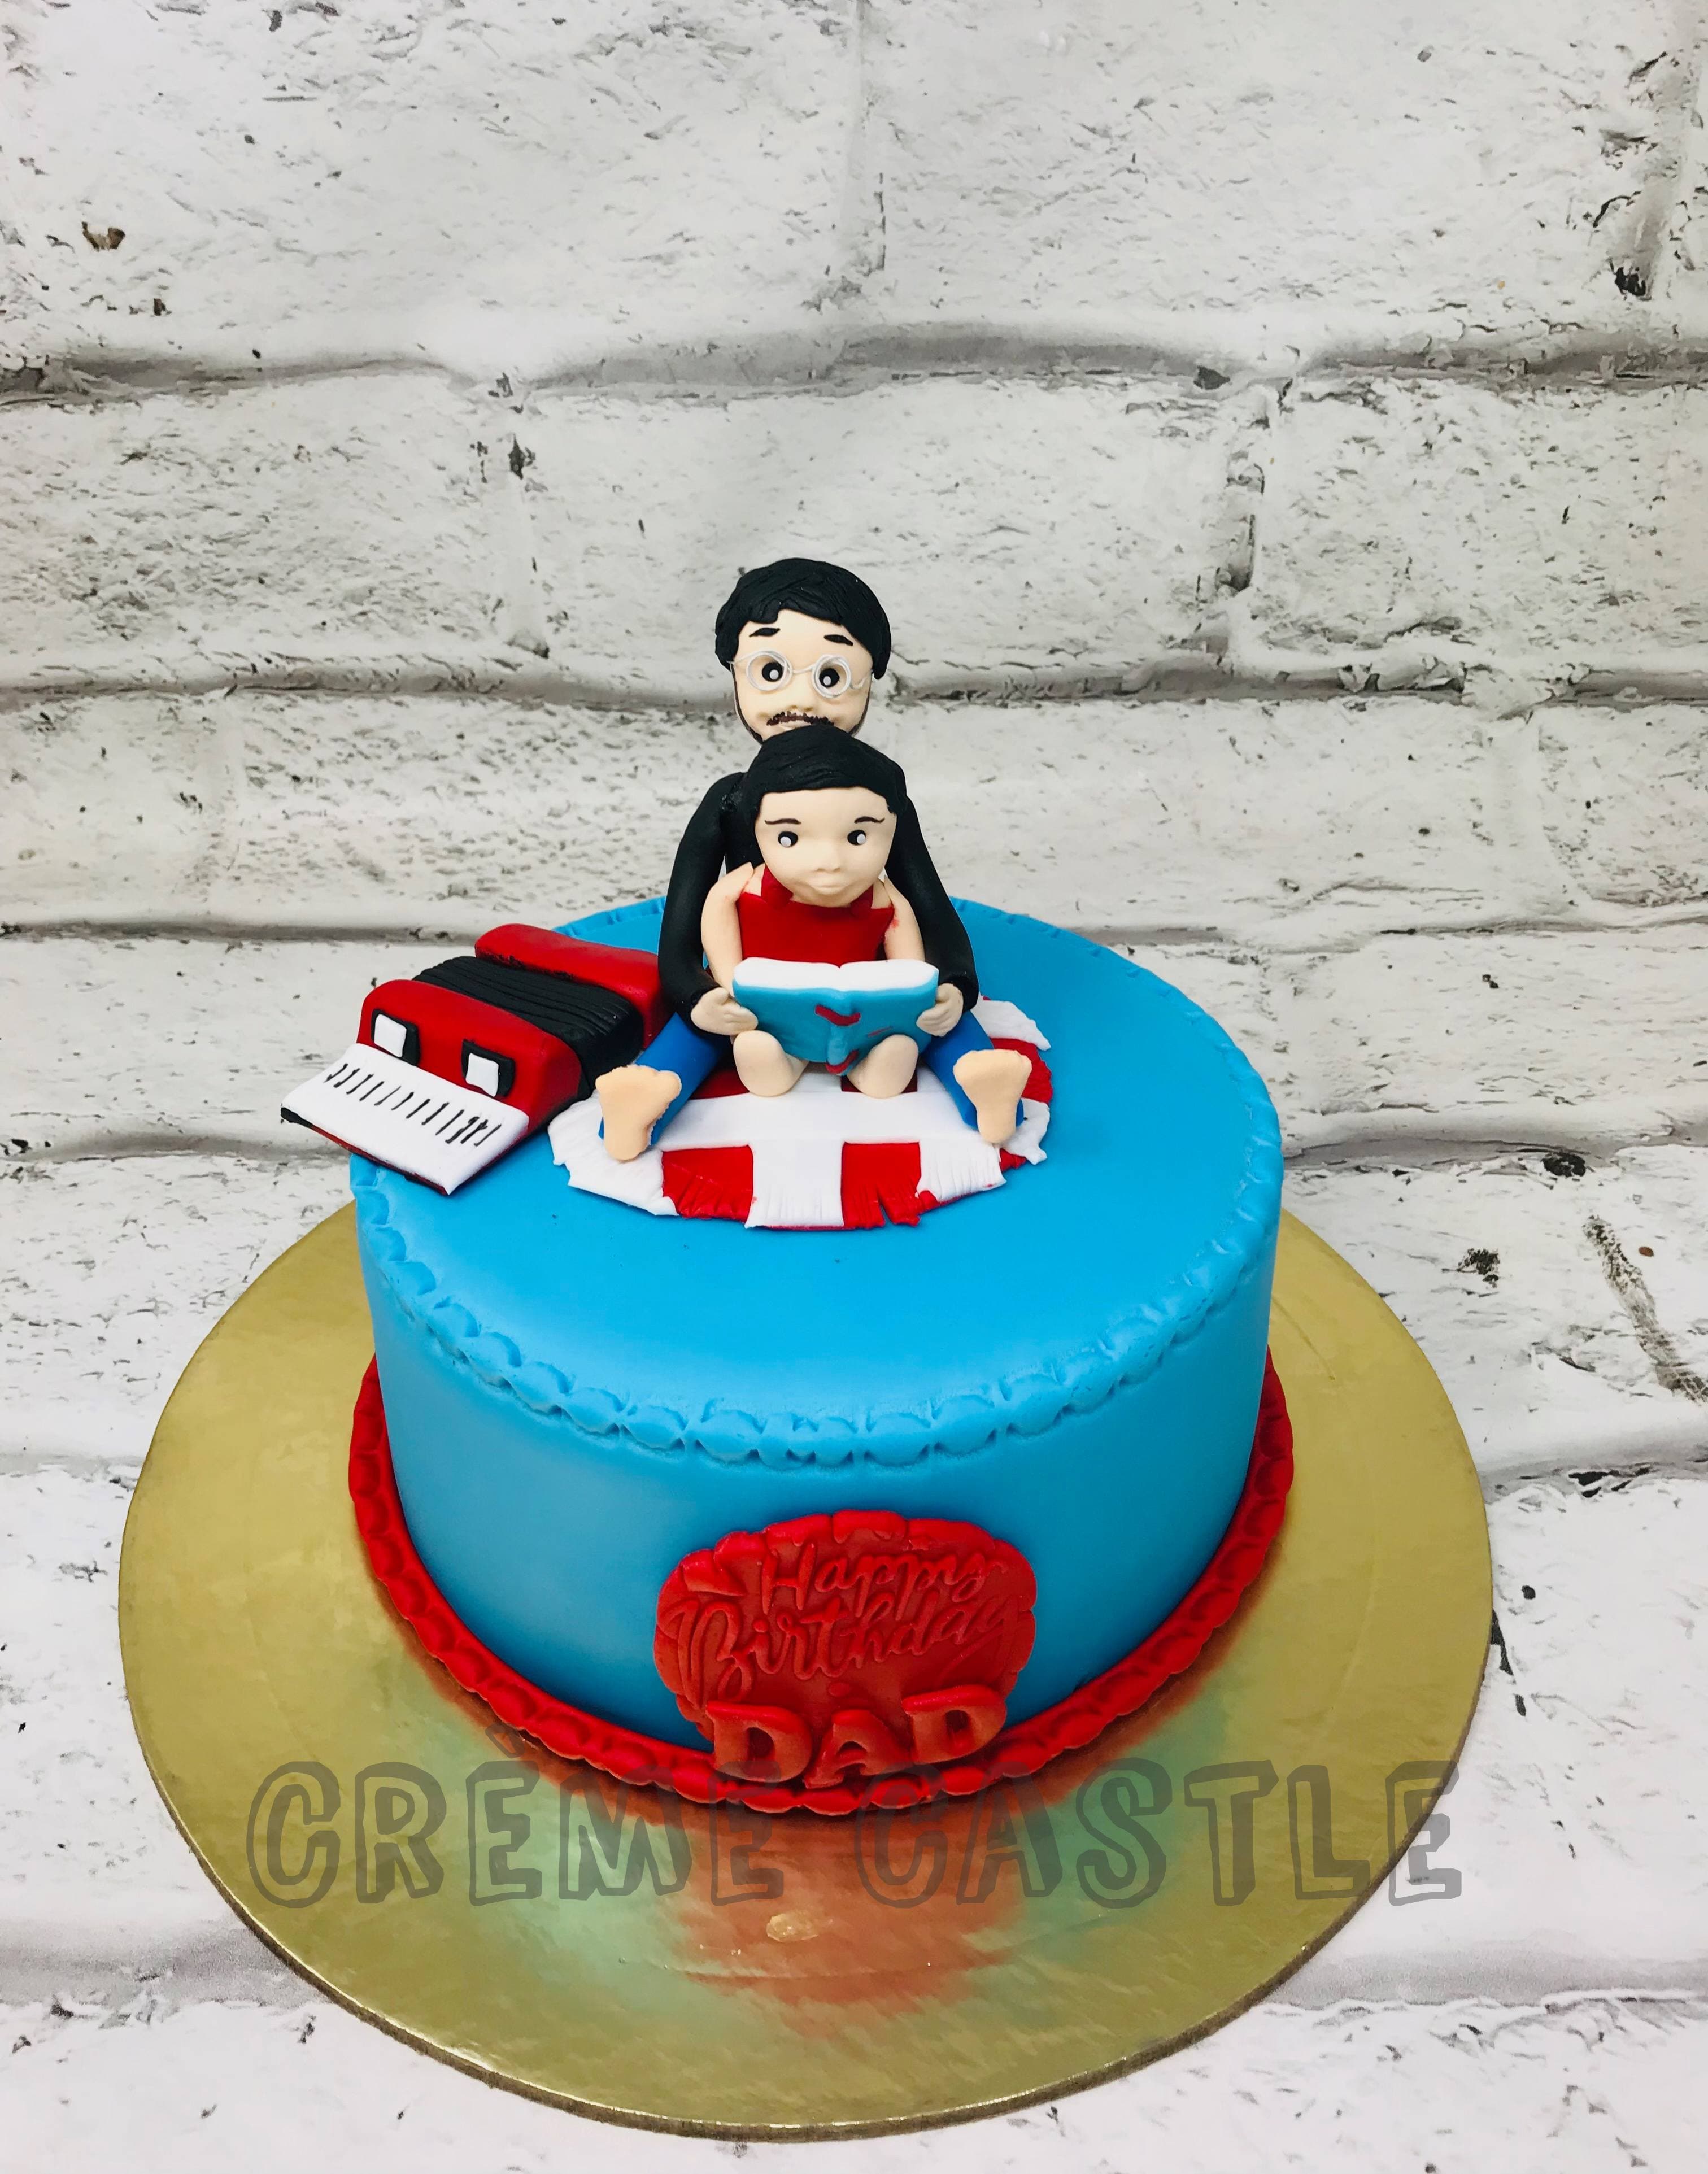 WAWA】Family father mother daughter son cake decoration toppers 一家人 蛋糕装饰摆件 |  Lazada